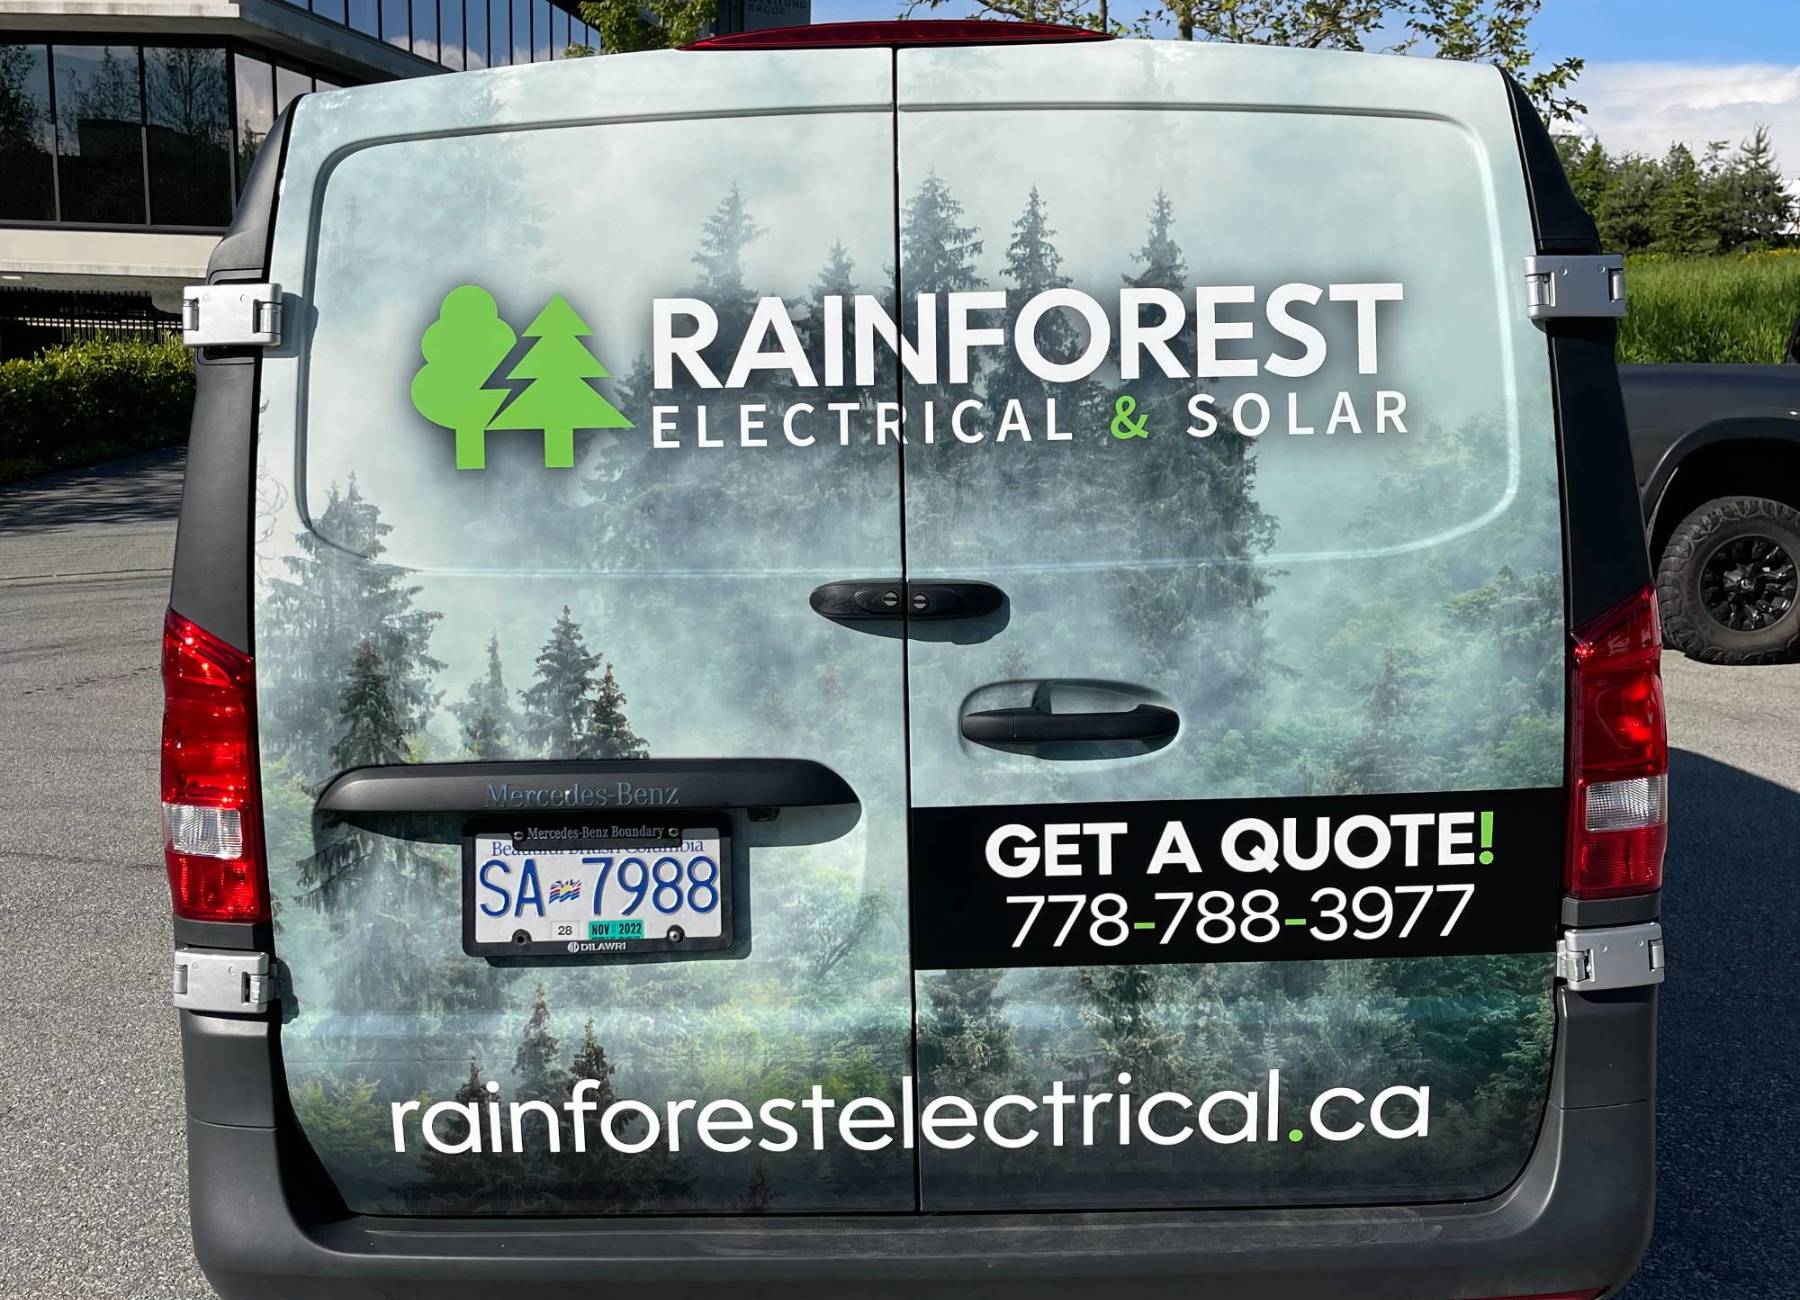 How to Find a Certified Electrician in Vancouver, BC